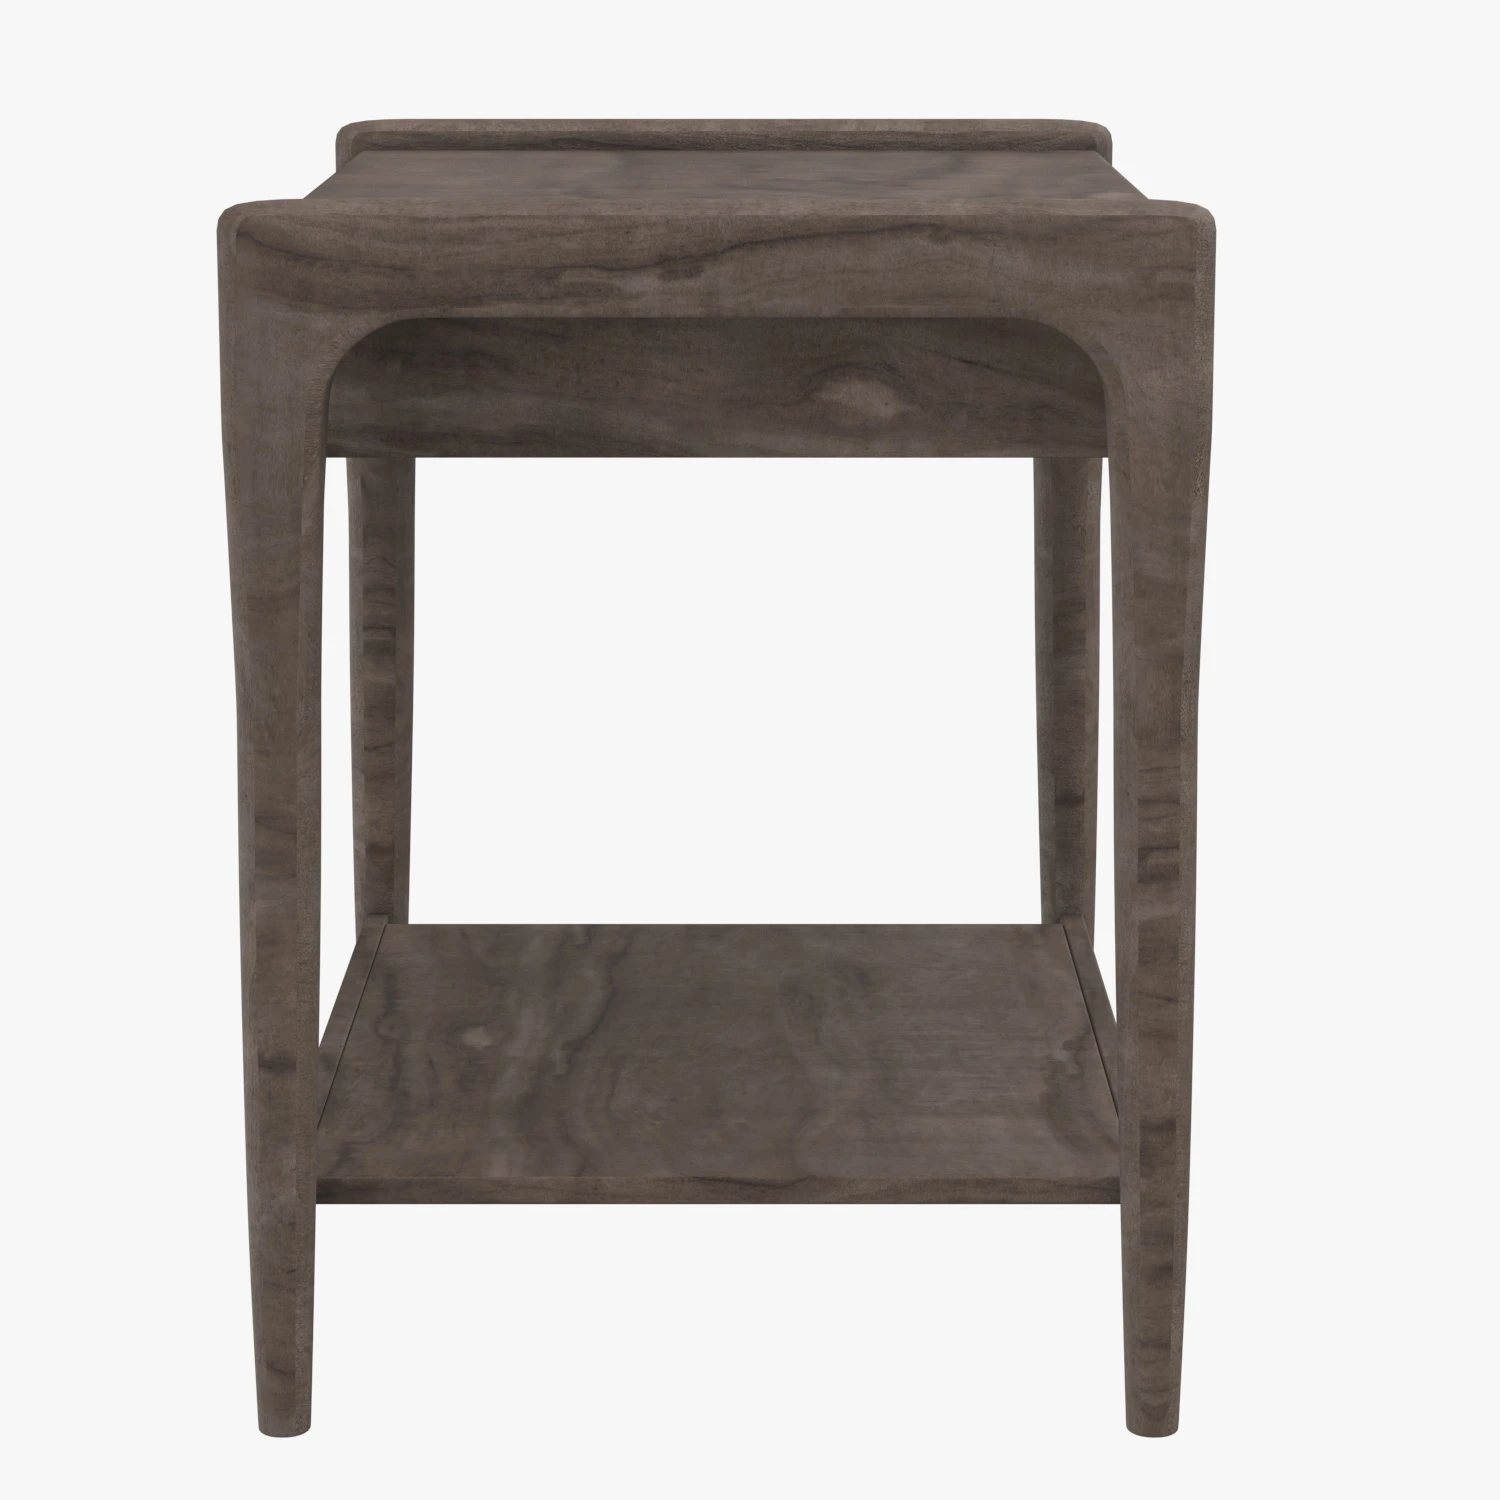 Valeria End Table IHRM-153 3D Model_03